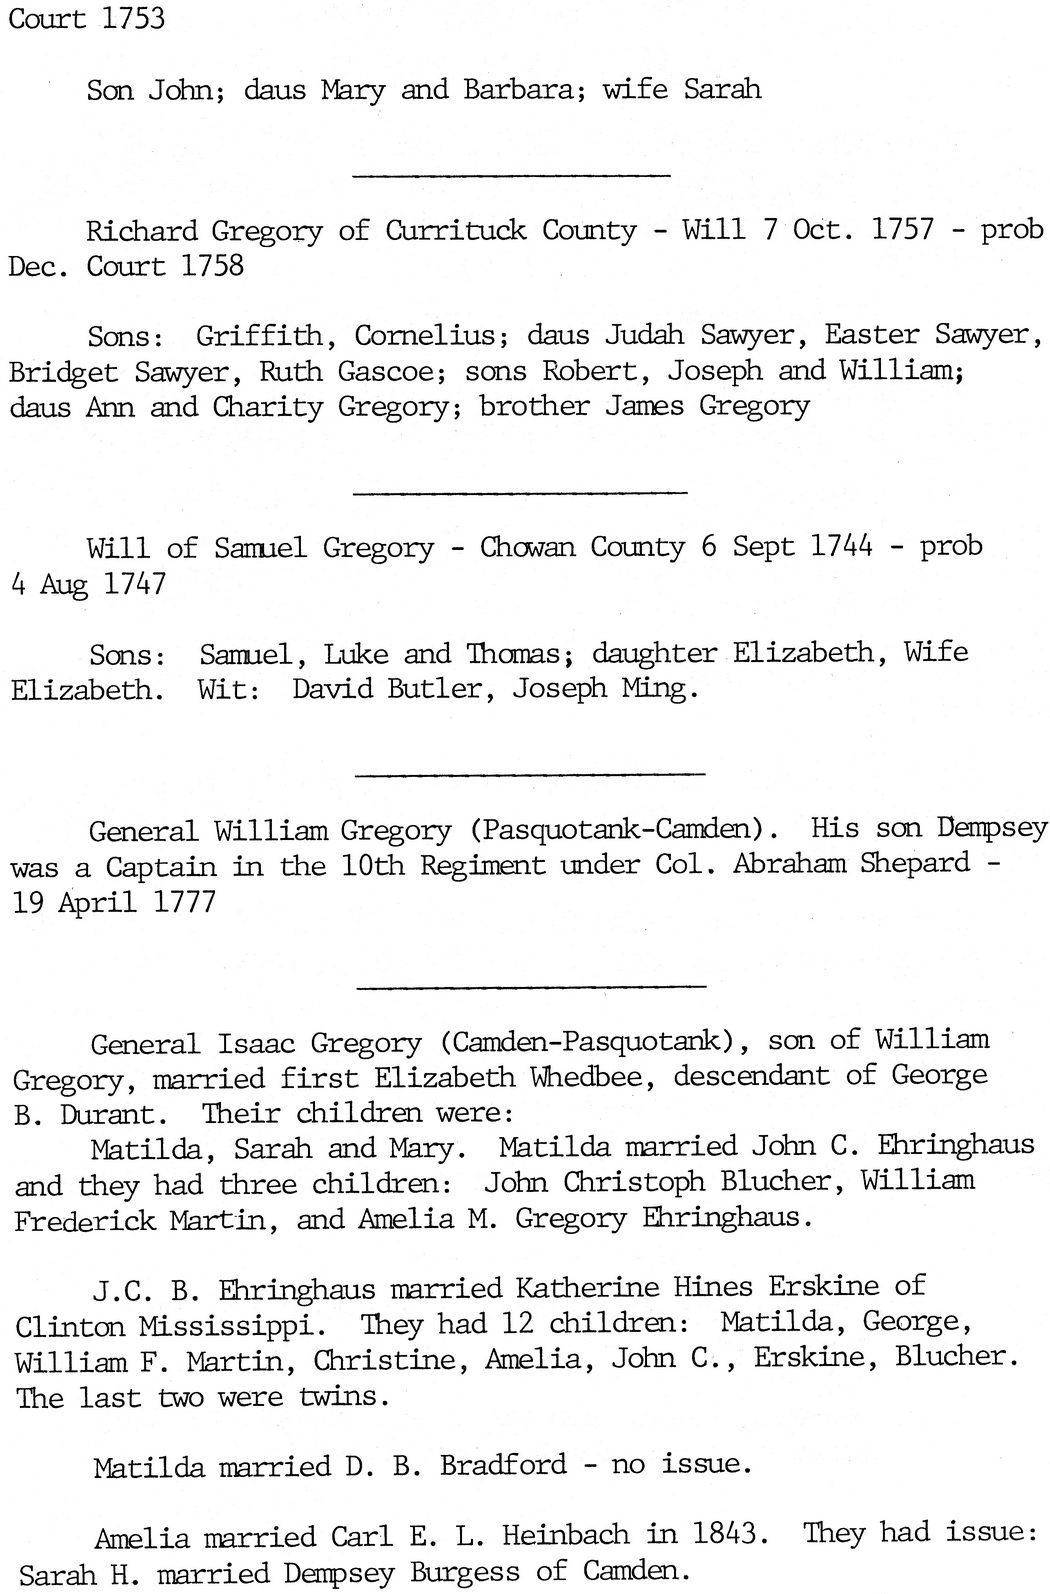 GREGORY - EHRINGHAUS - MACKIE Family Records - Pasq and Camden NC - 2